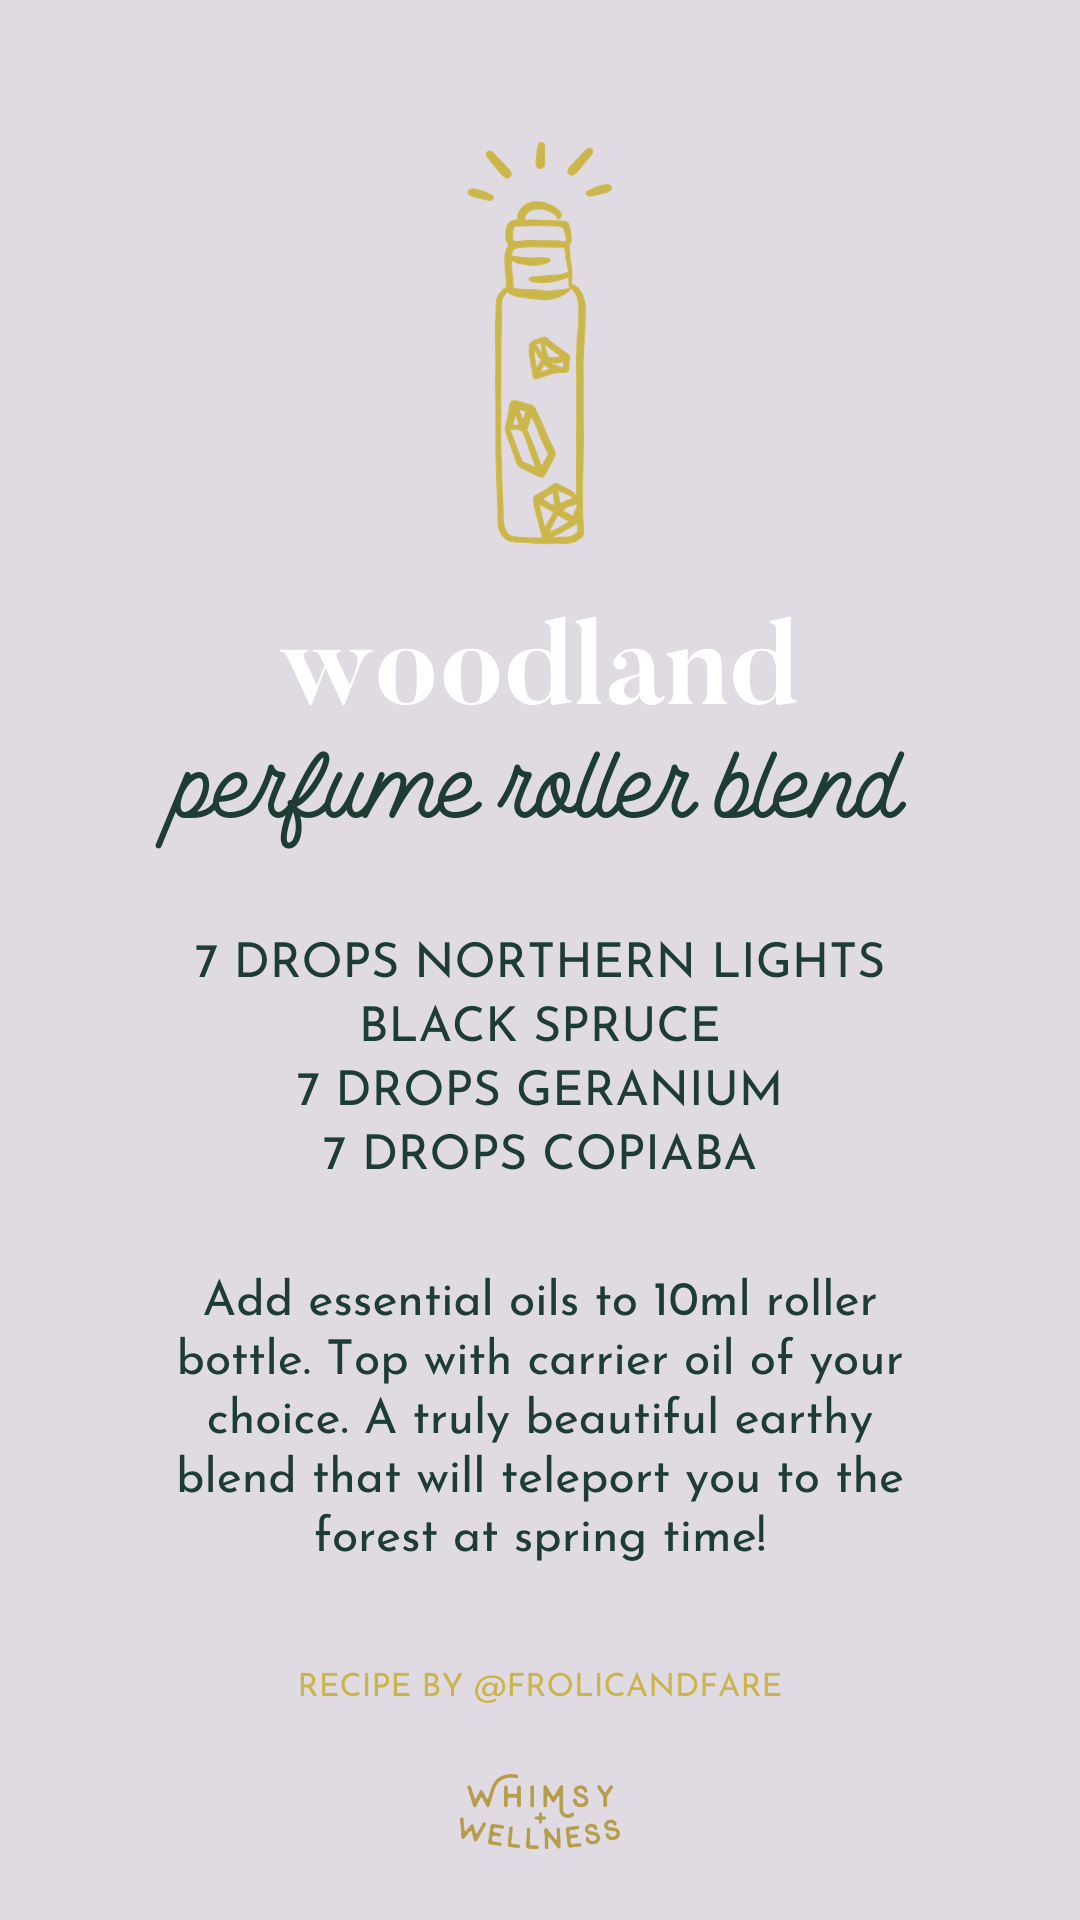 Woodland perfume roller blend in 10ml Whimsy + Wellness crystal roller and Young Living essential oils.